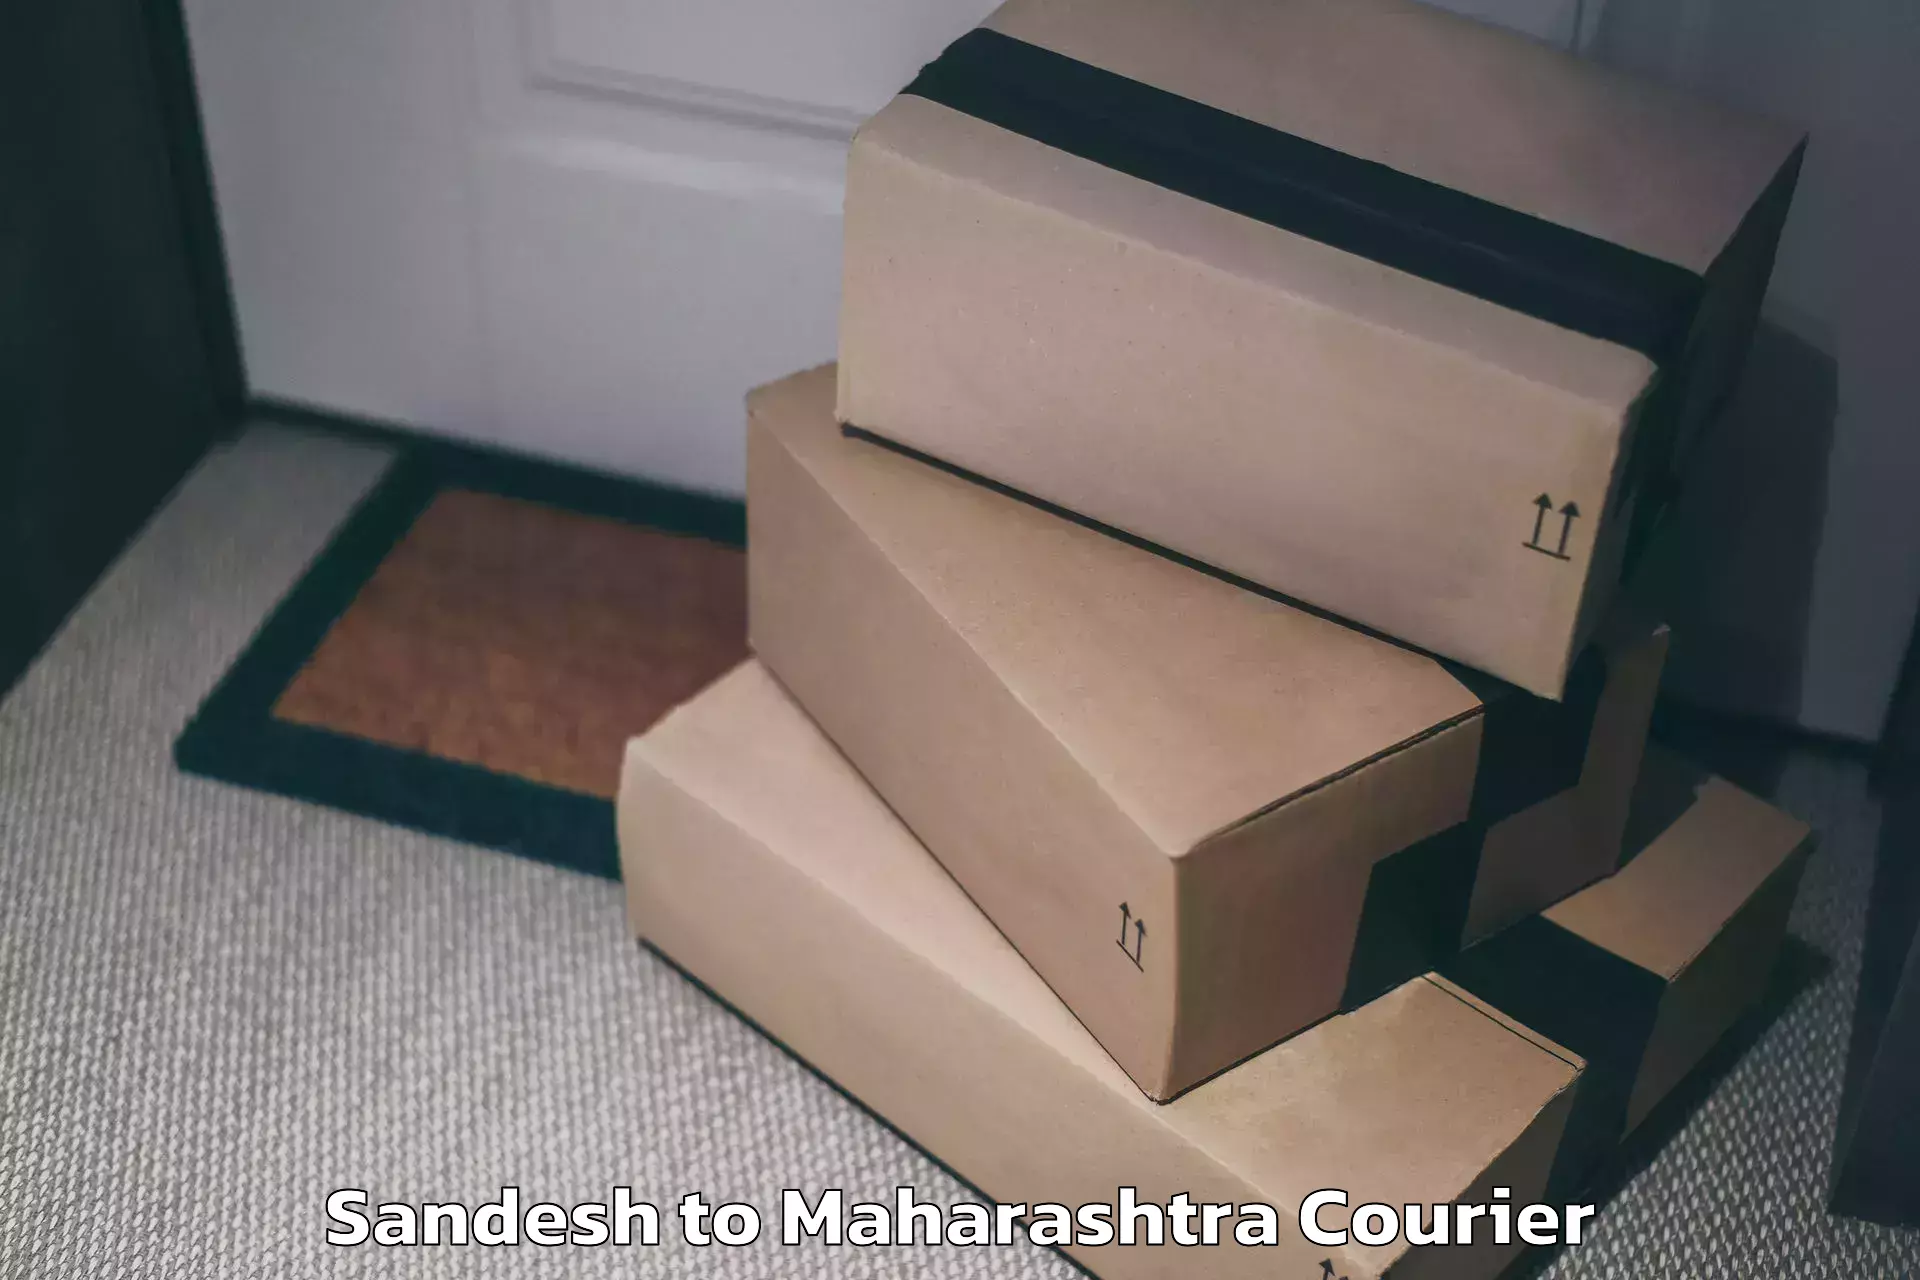 Luggage transport consultancy Sandesh to Alephata